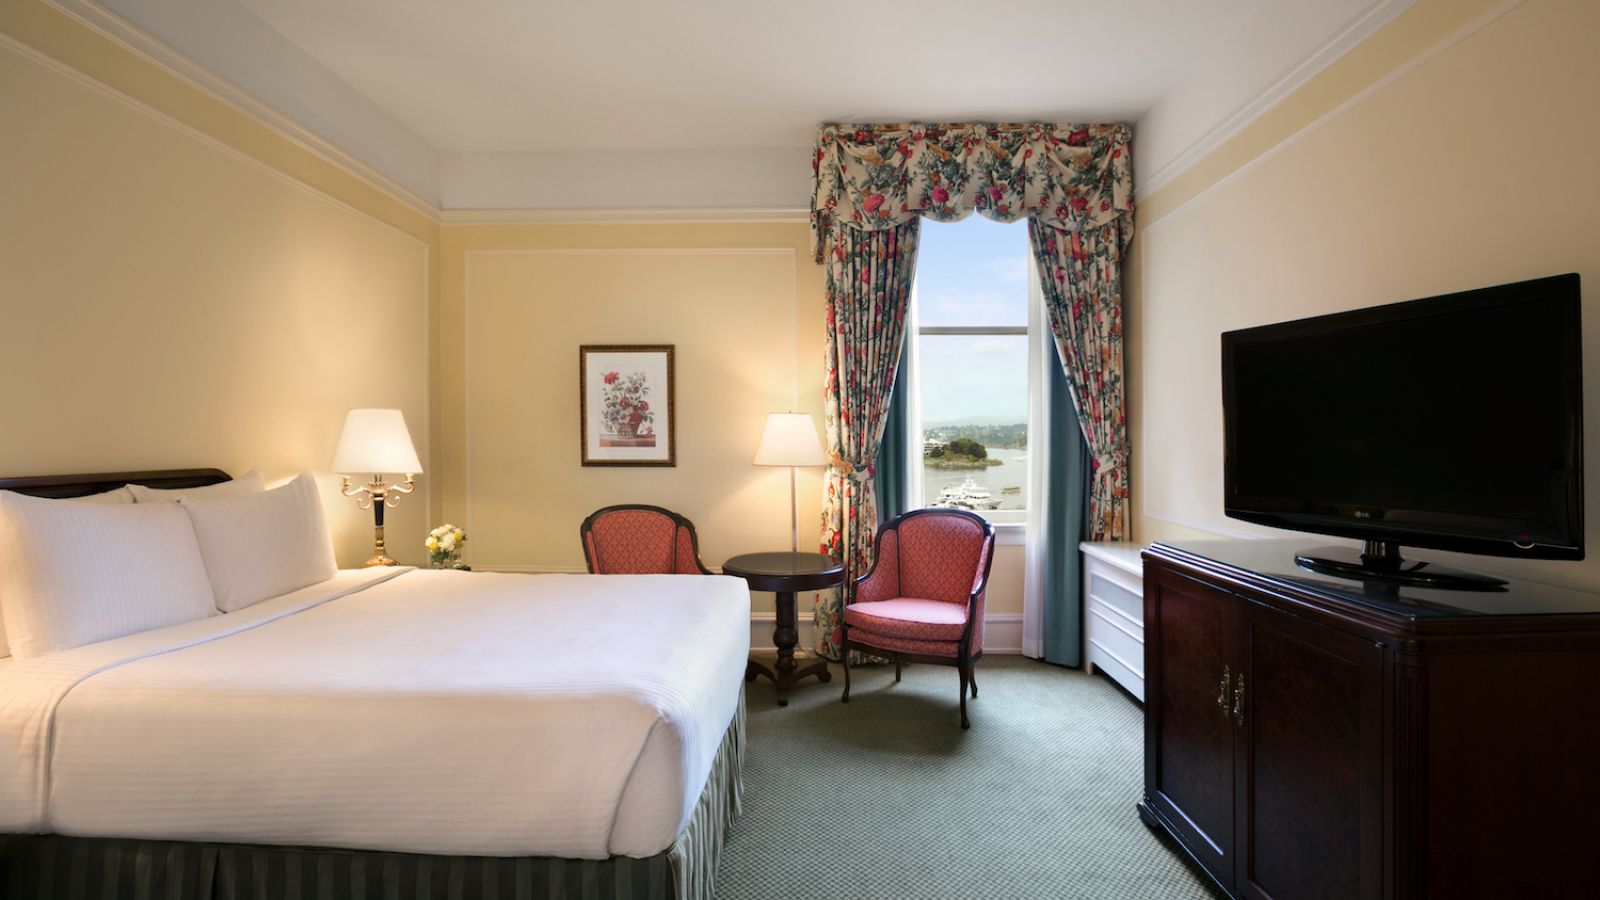 The Fairmont Empress - Vancouver Island golf packages